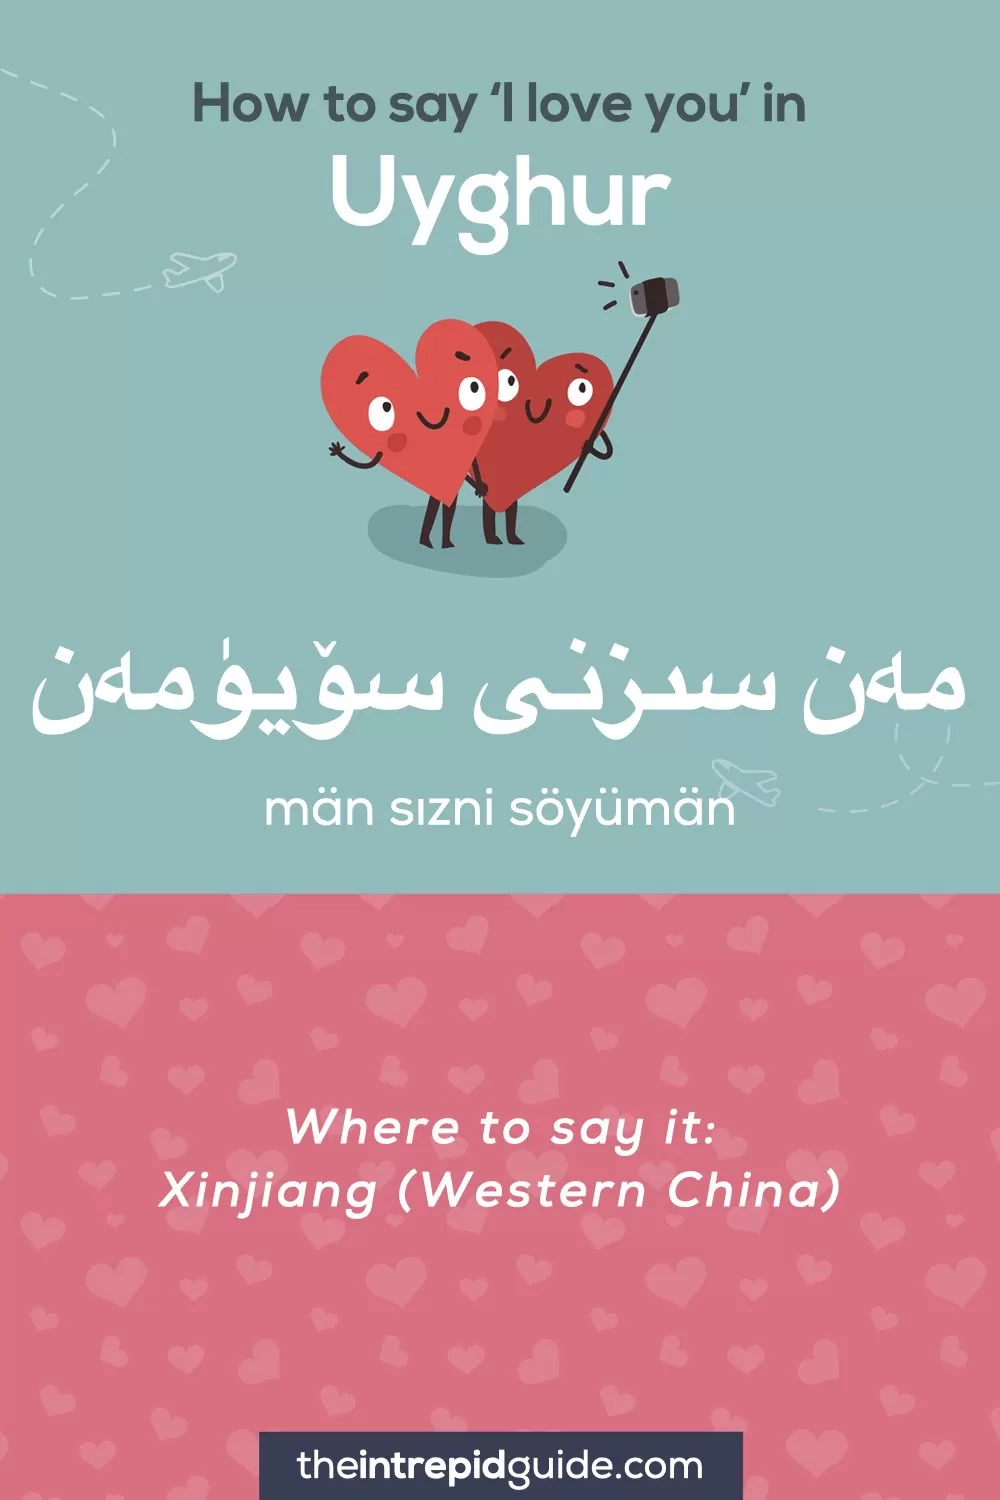 How to say I love you in different languages - Uyghur - مەن سىزنى سۆيۈمەن